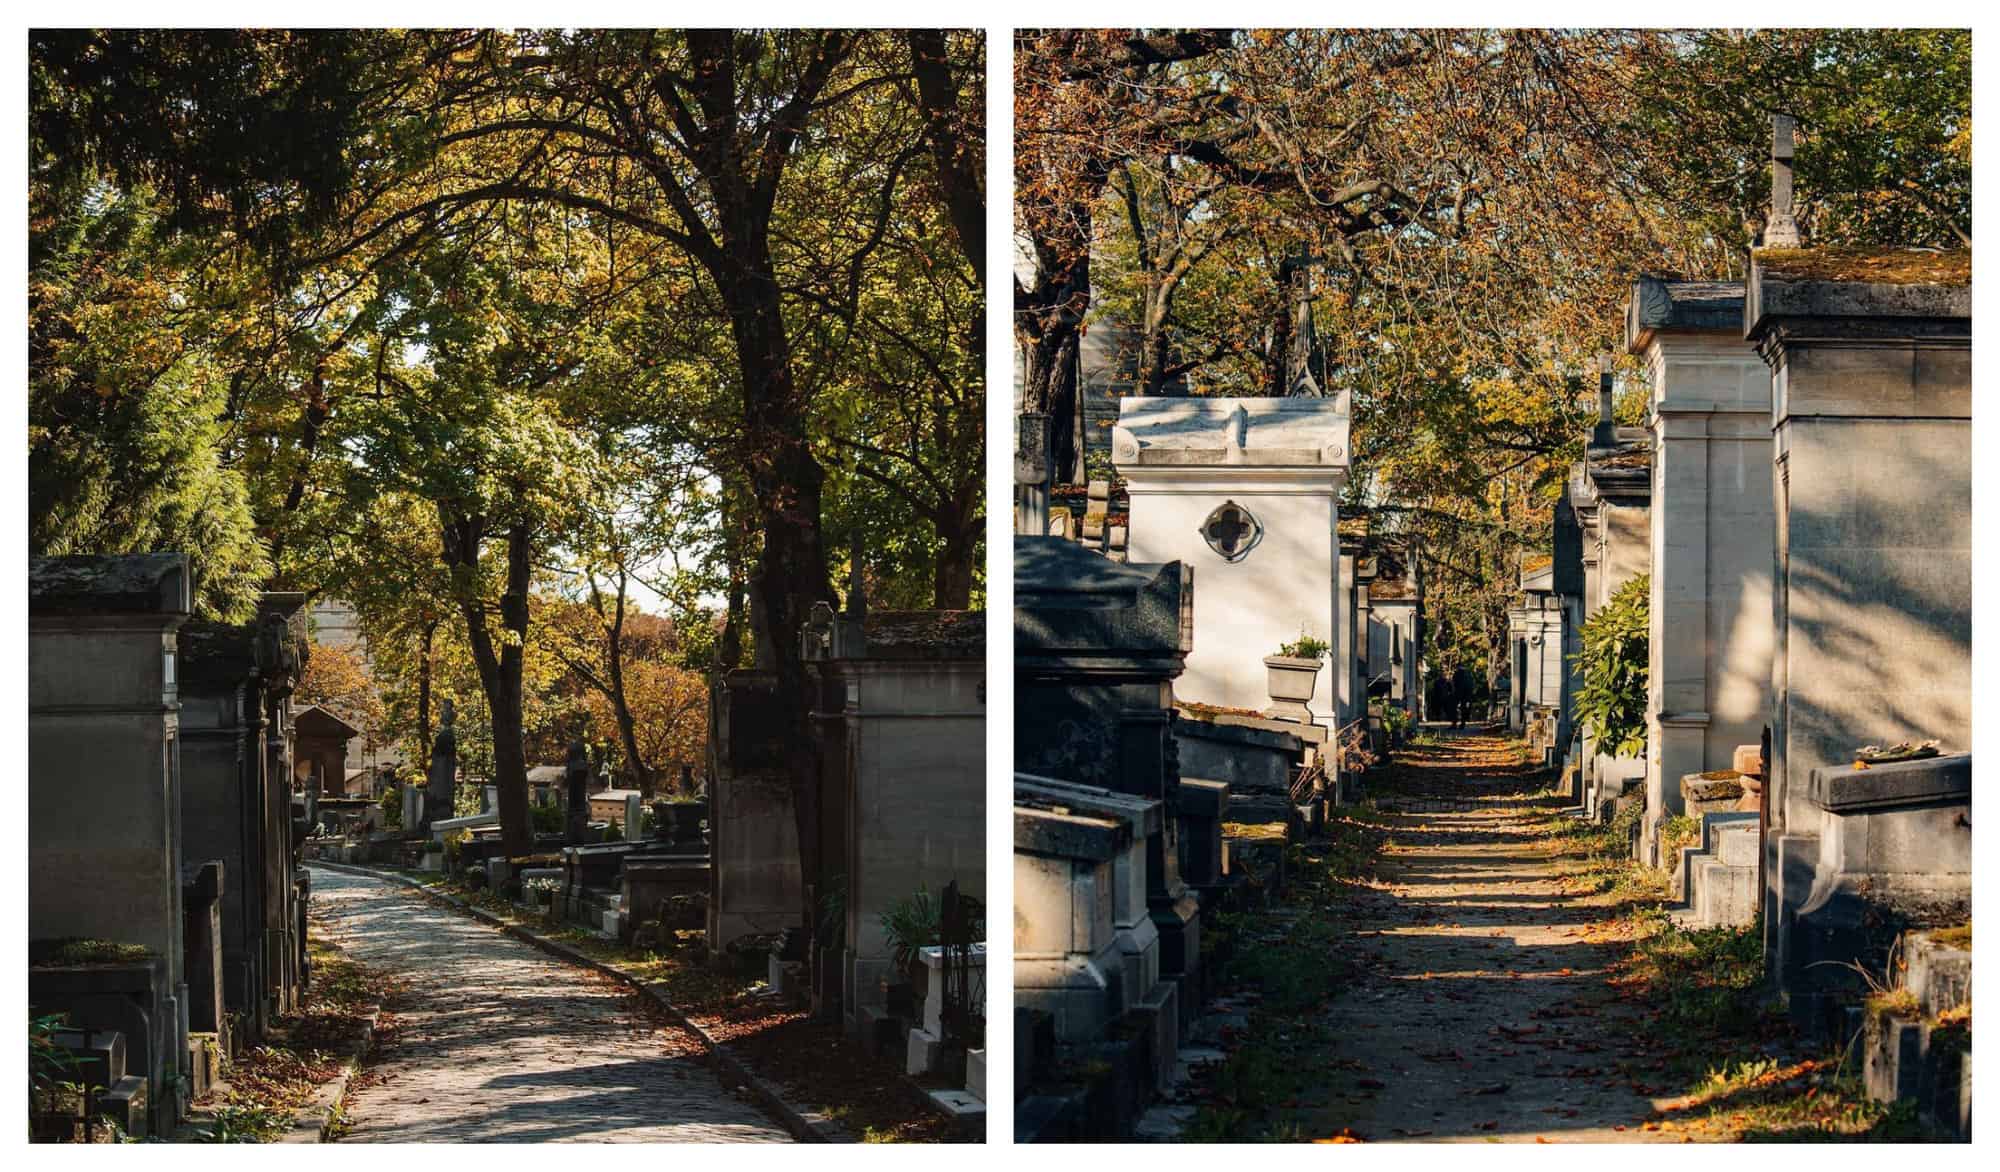 2 pictures of the Pere Lachaise cemetery in the fall with tombstones and trees with crisp, brown leaves.